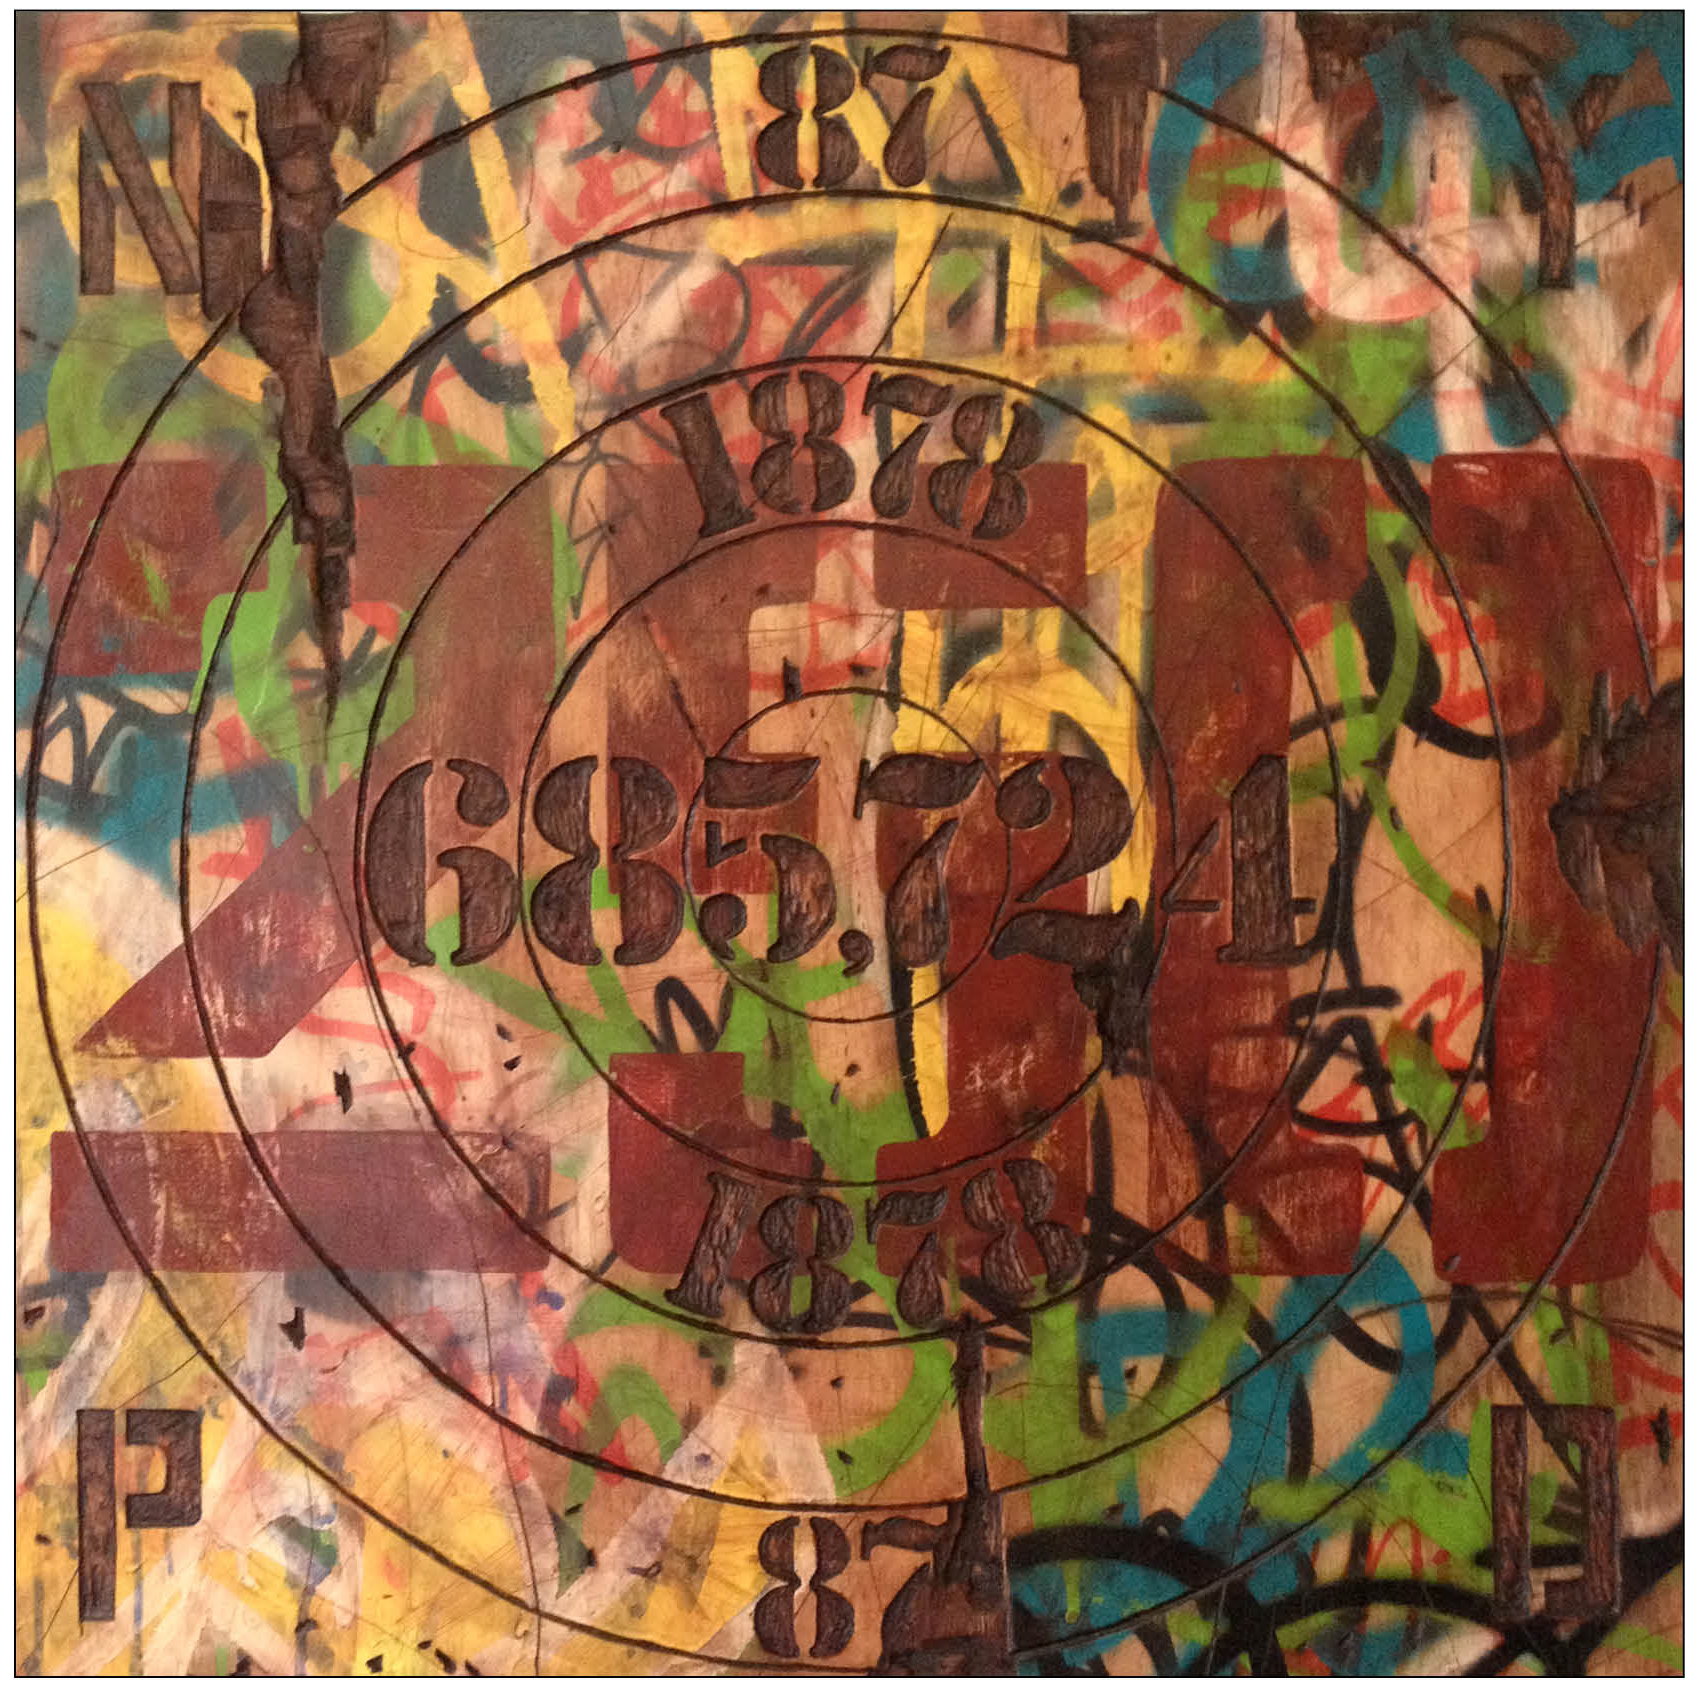  New York, New York (The Stop &amp; Frisk Gameboard)  24” x 24”&nbsp;  oil paint, acrylic, spray paint, plywood  2013    